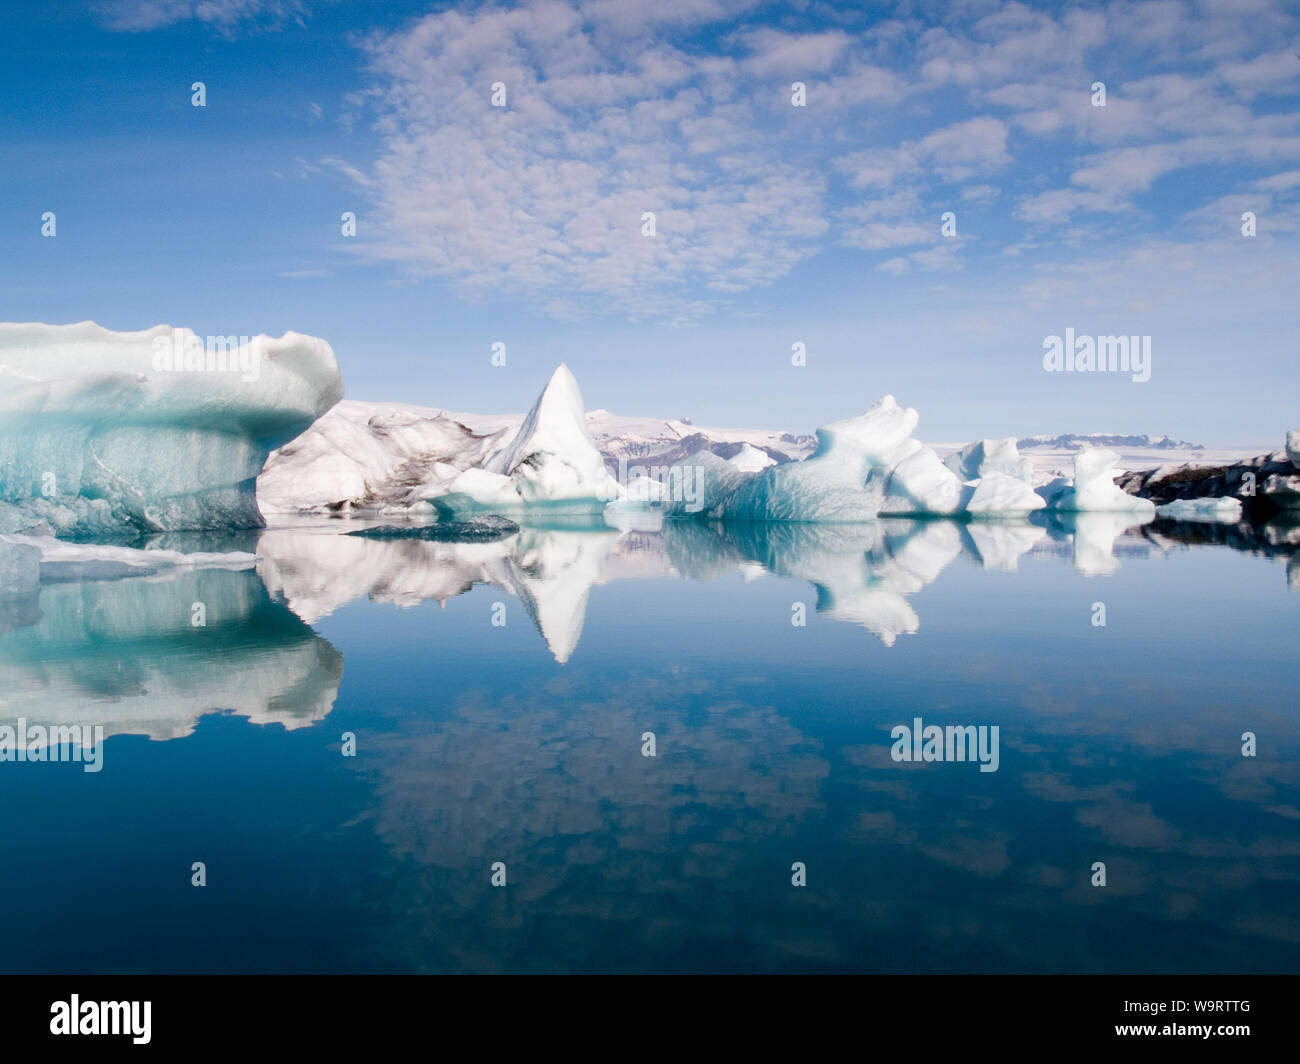 A group of floating iceburgs in a beautiful landscape under a blue sky. Stock Photo